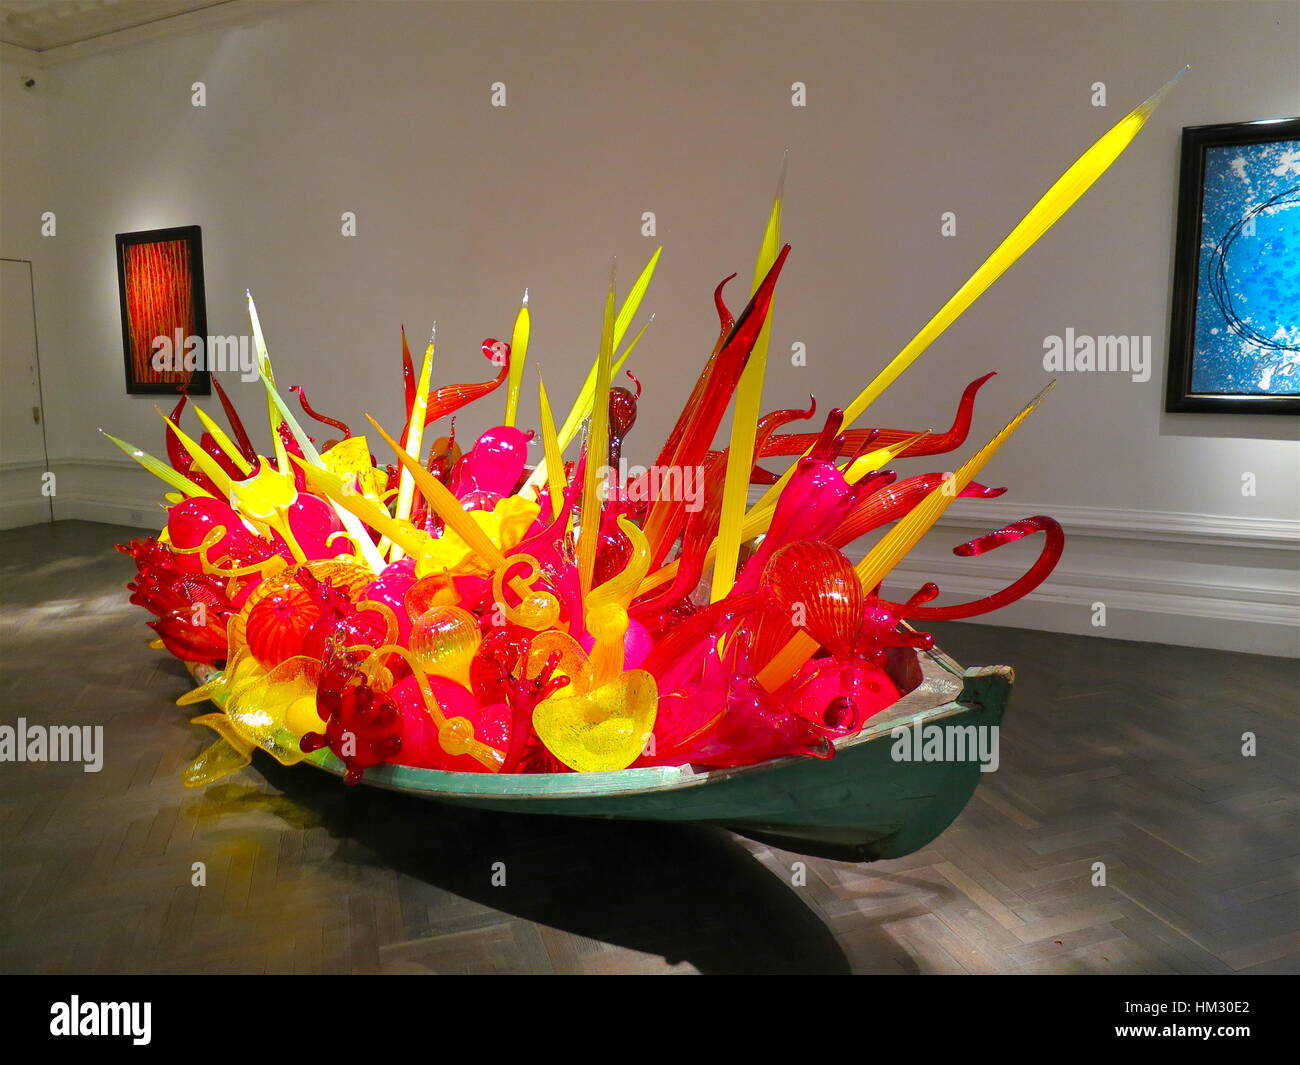 Red pink and yellow glass sculpture in a boat created by American artist Dale Chihuly. Halcyon Gallery, London. April 2014 Stock Photo